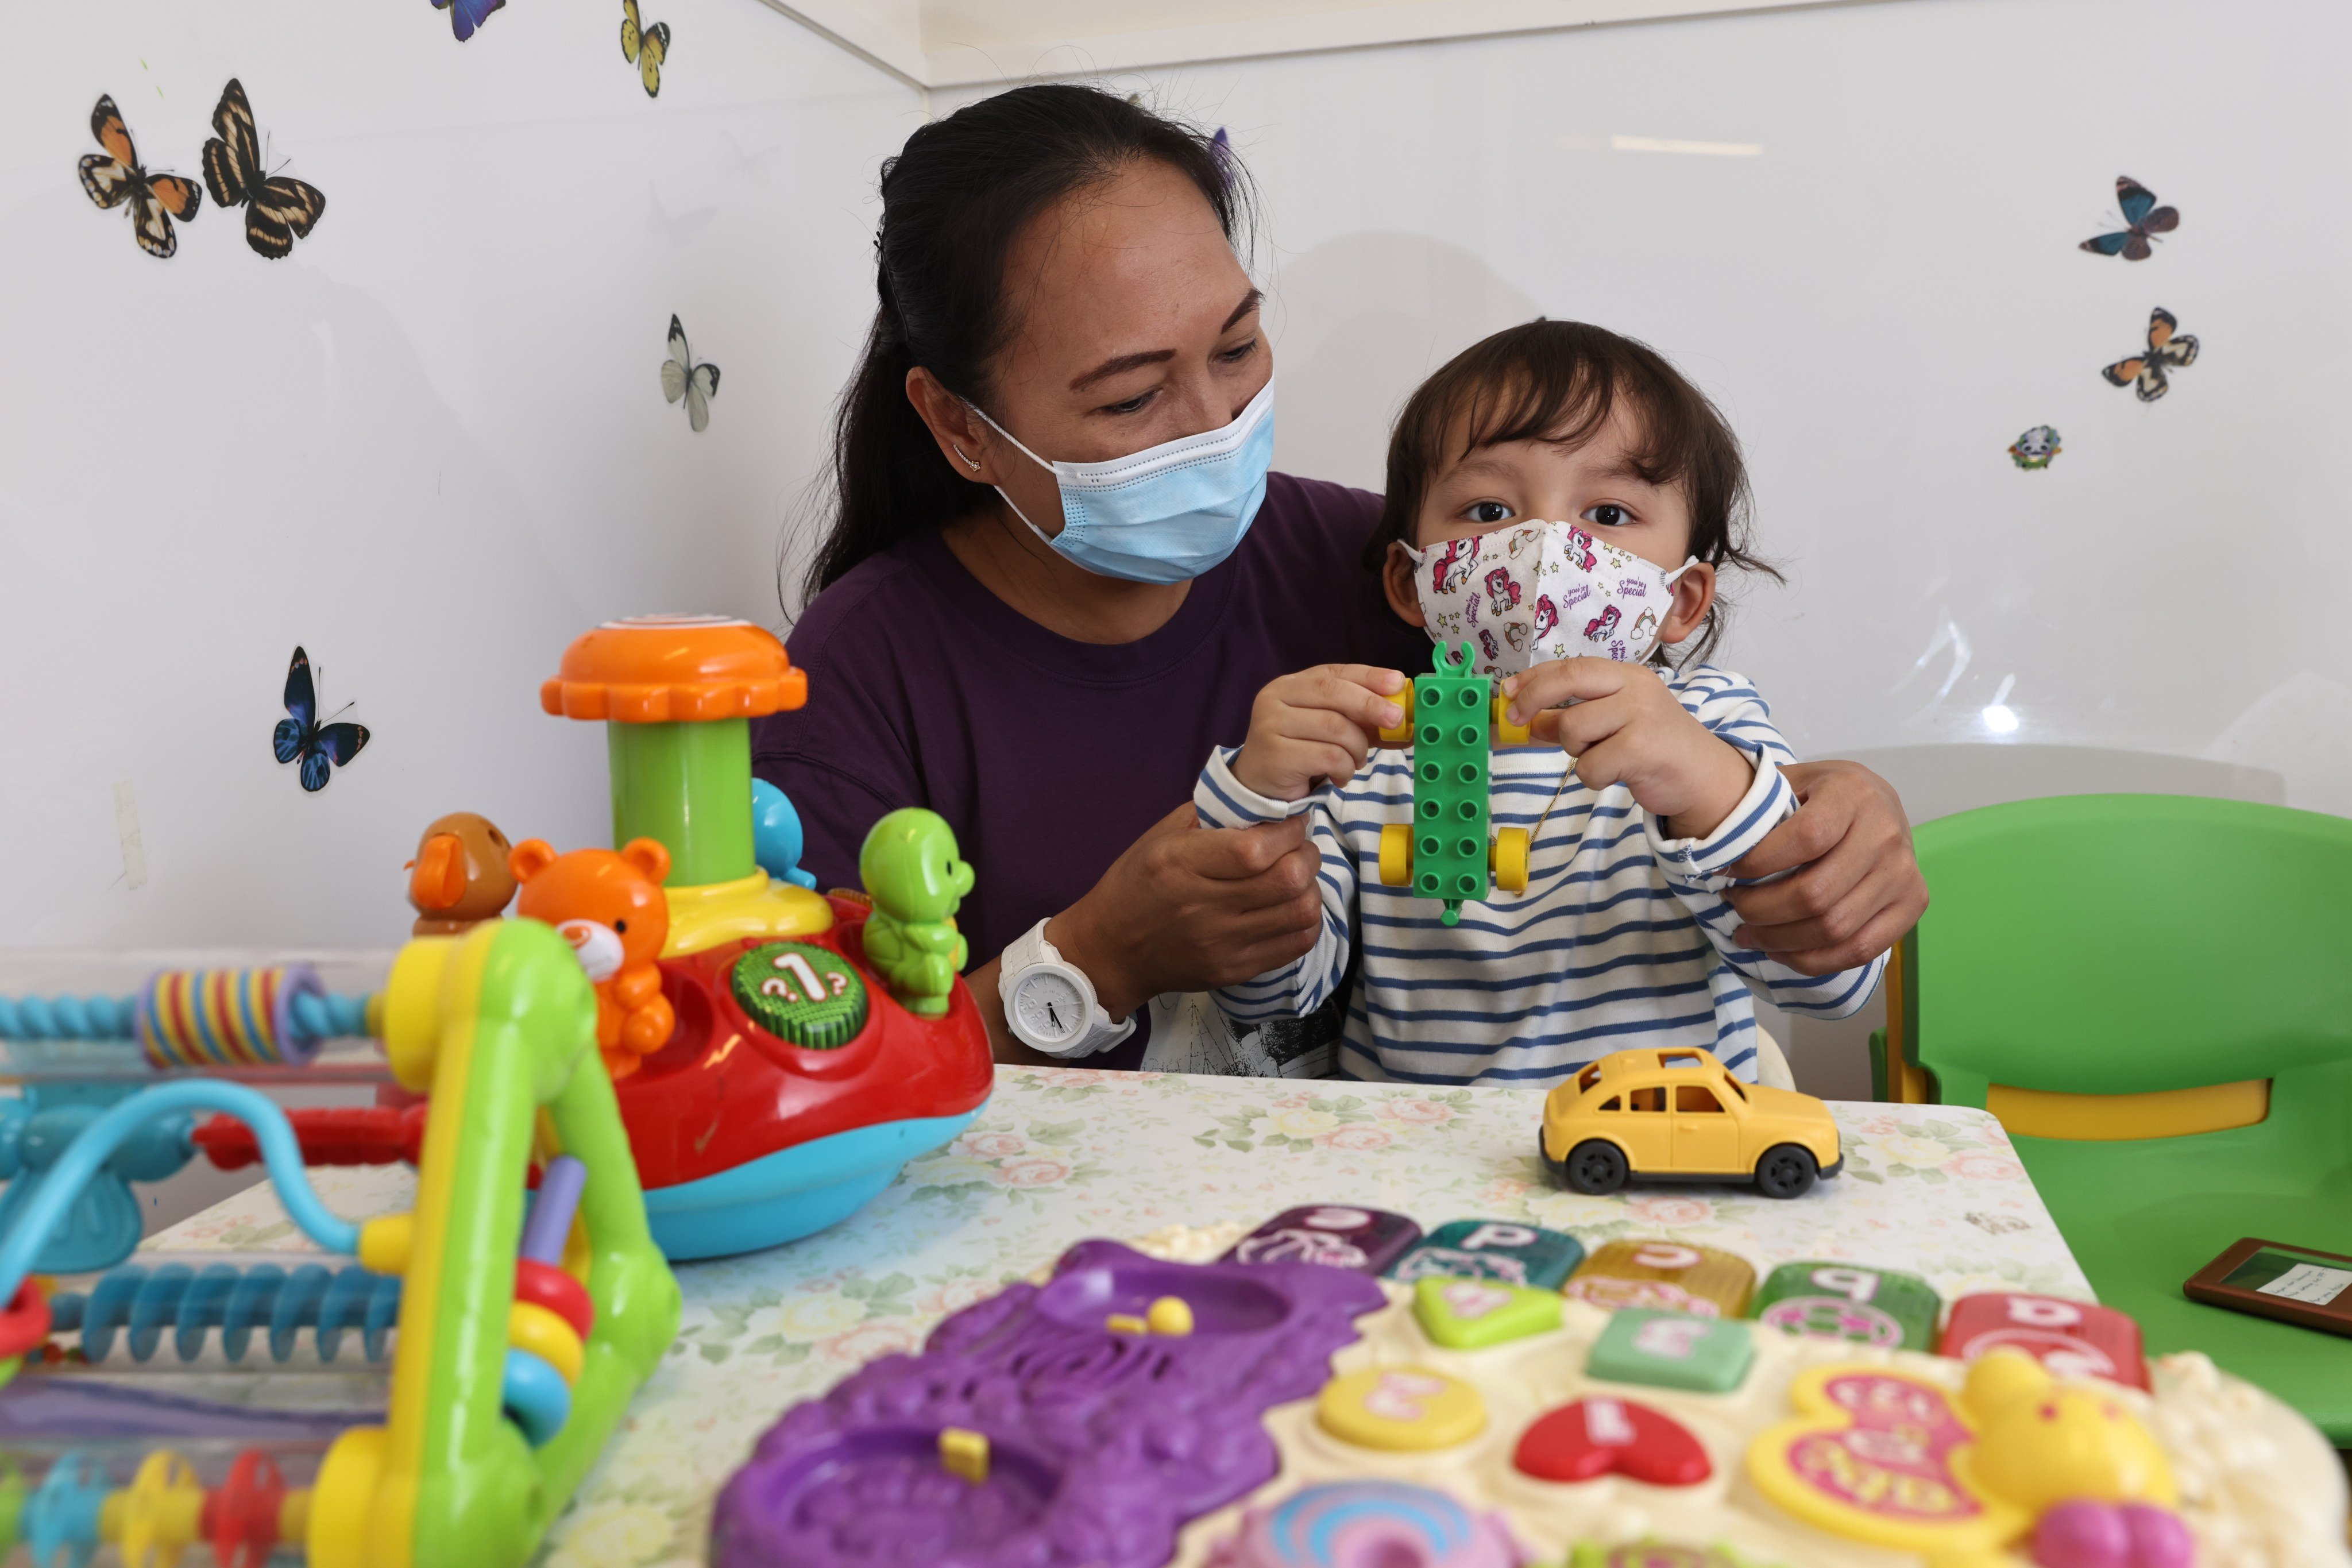 A migrant worker mother and her child in October 2021. In Hong Kong, children born to foreign domestic workers may not have access to public healthcare and welfare services. Photo: K. Y. Cheng